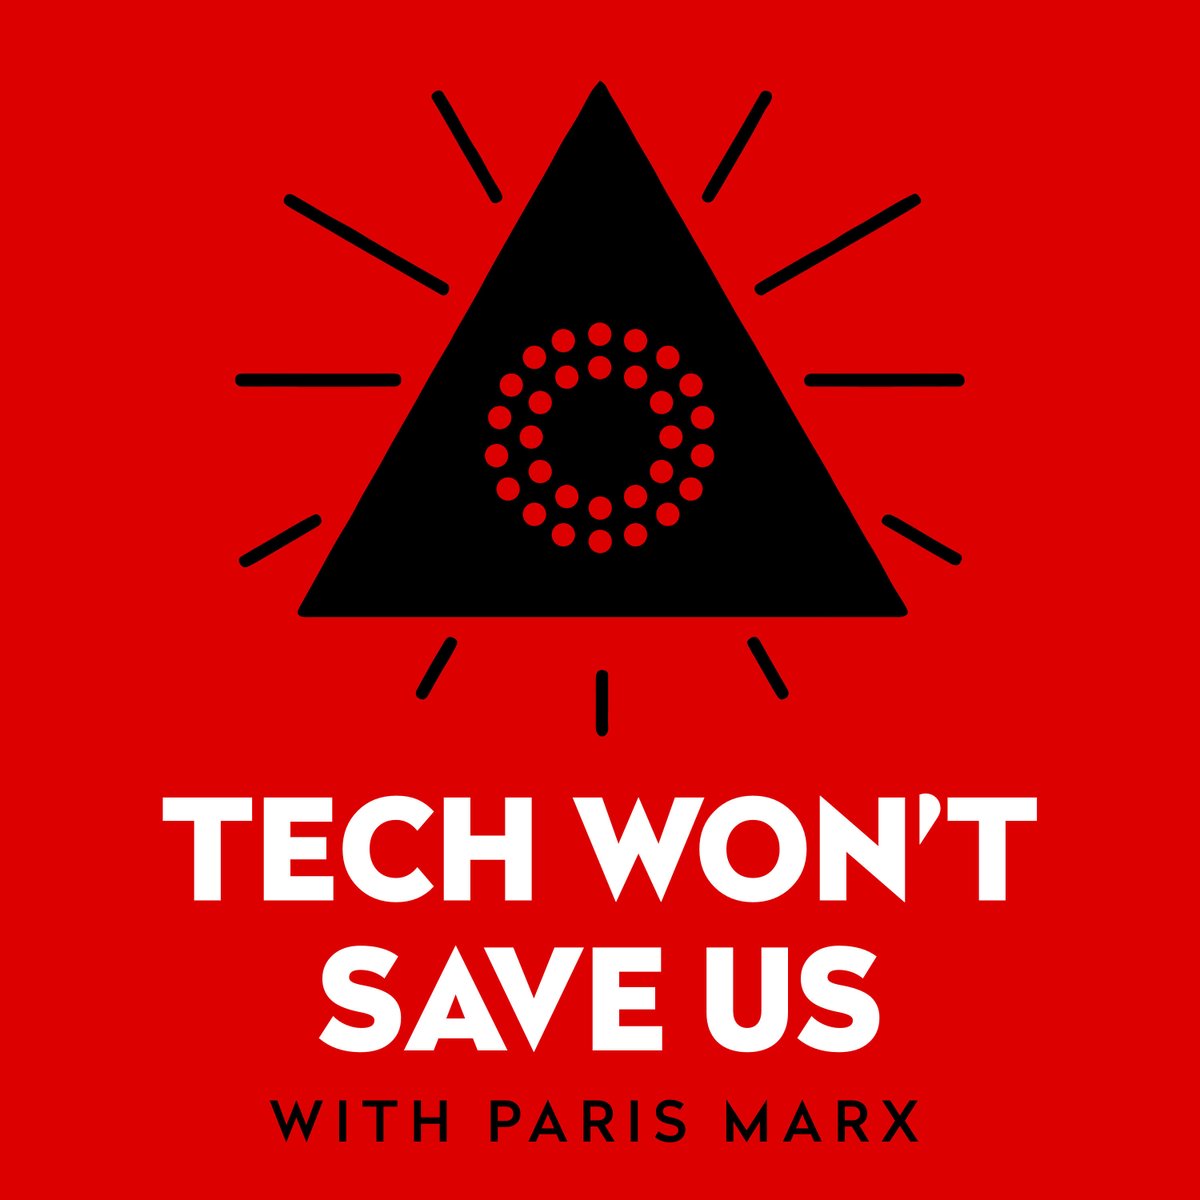 On a new 💾@techwontsaveus💾 @Tweetermeyer joins @parismarx to discuss Tesla's stagnation as an electric vehicle manufacturer & what that could mean for its future as competitors cut into their market share: techwontsave.us/episode/219_te… harbingermedianetwork.com 🔶